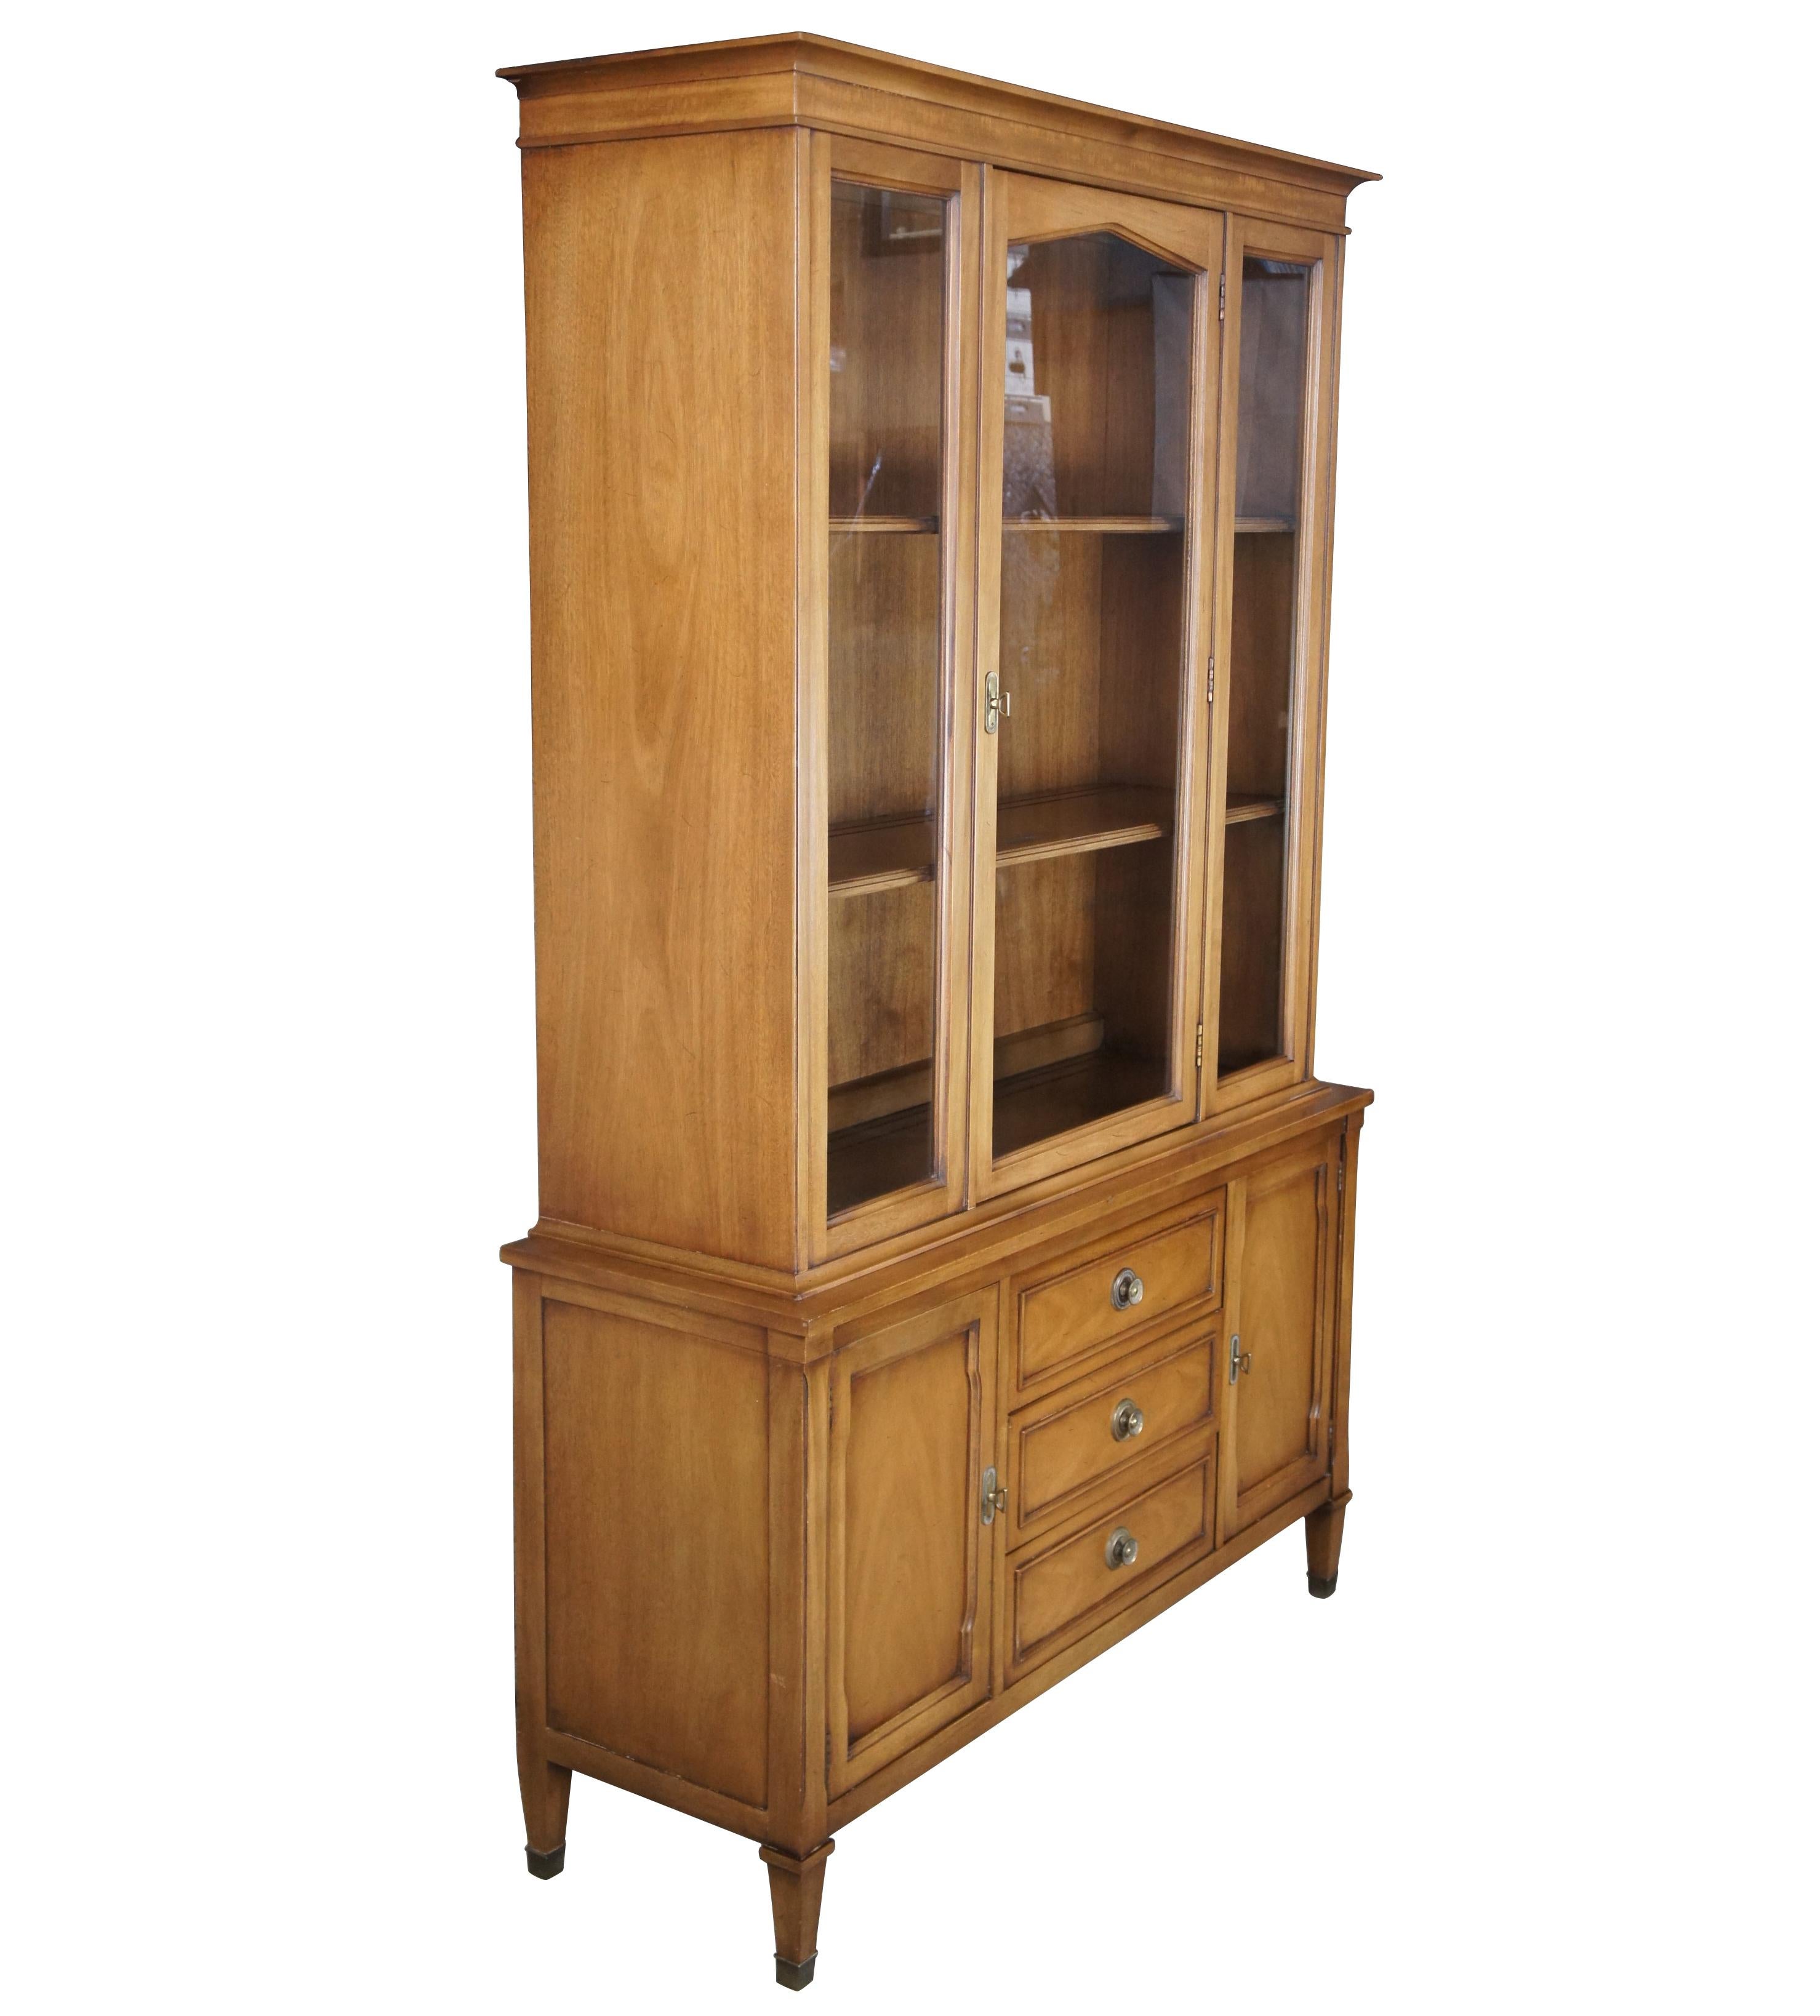 Vintage Drexel triune china cabinet. Made of mahogany featuring upper curio with two shelves and plate grooves, and a lower cupboard with two doors and three drawers. circa 1967. 555-420-2.